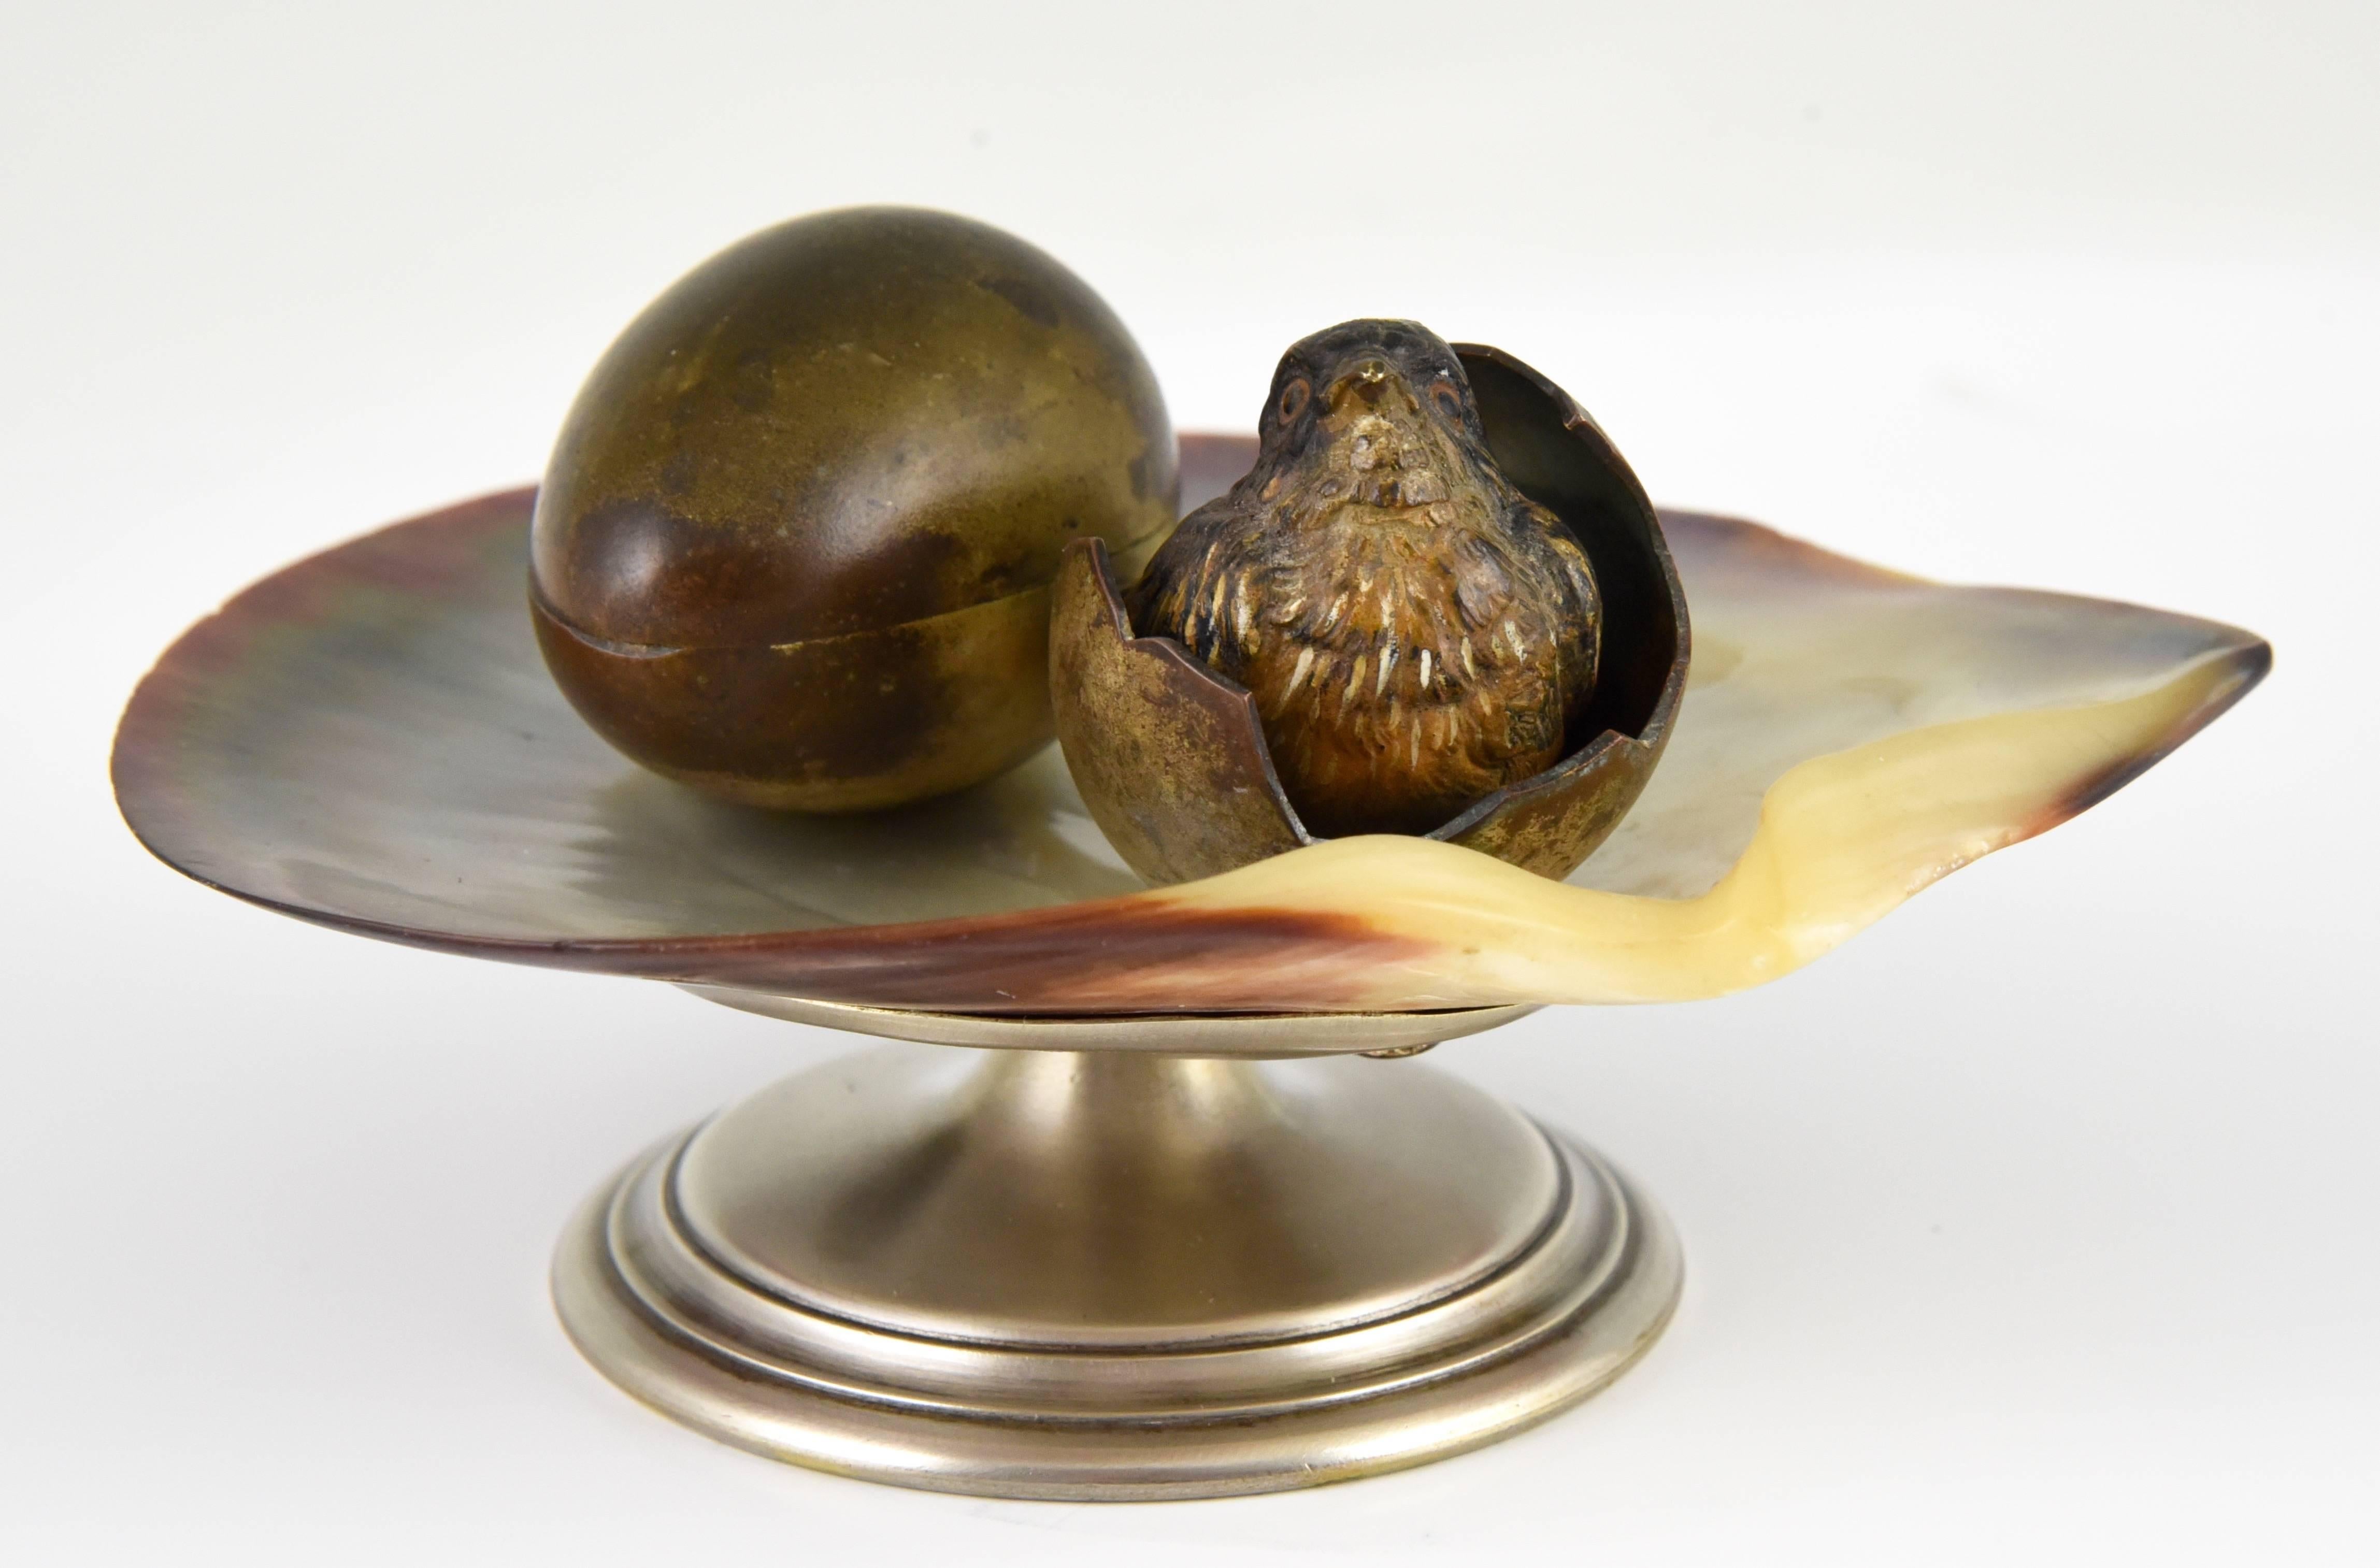 Austrian Antique Vienna Bronze Inkwell Tray with Bird and Egg Shell on Natural Shell 1900